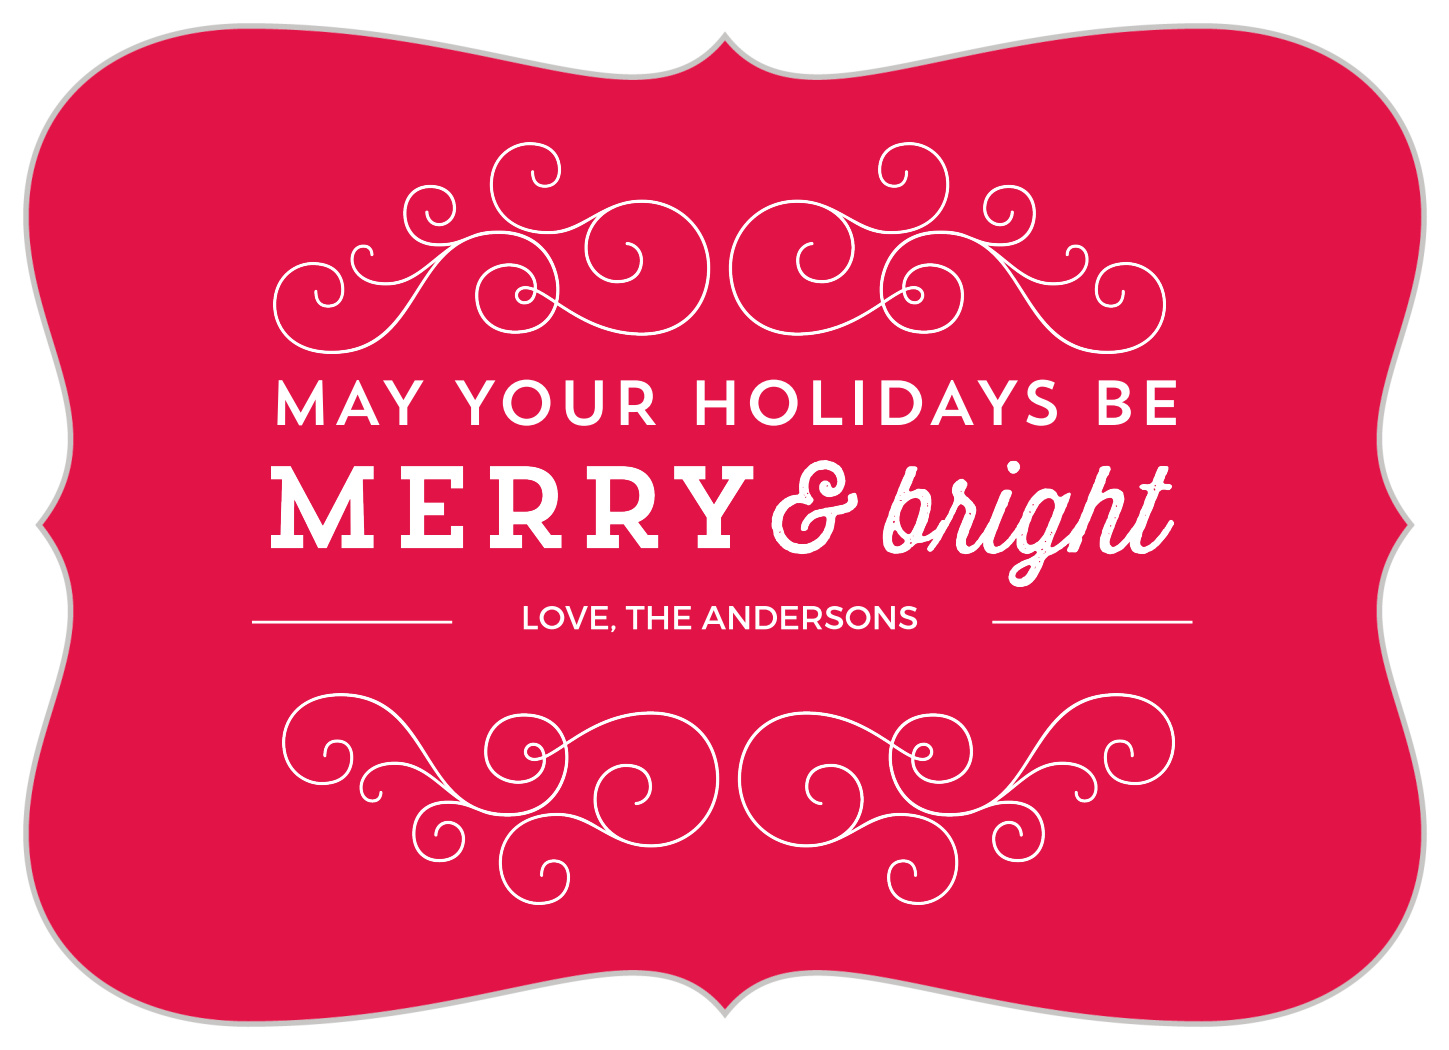 Merry Bright Holiday Cards